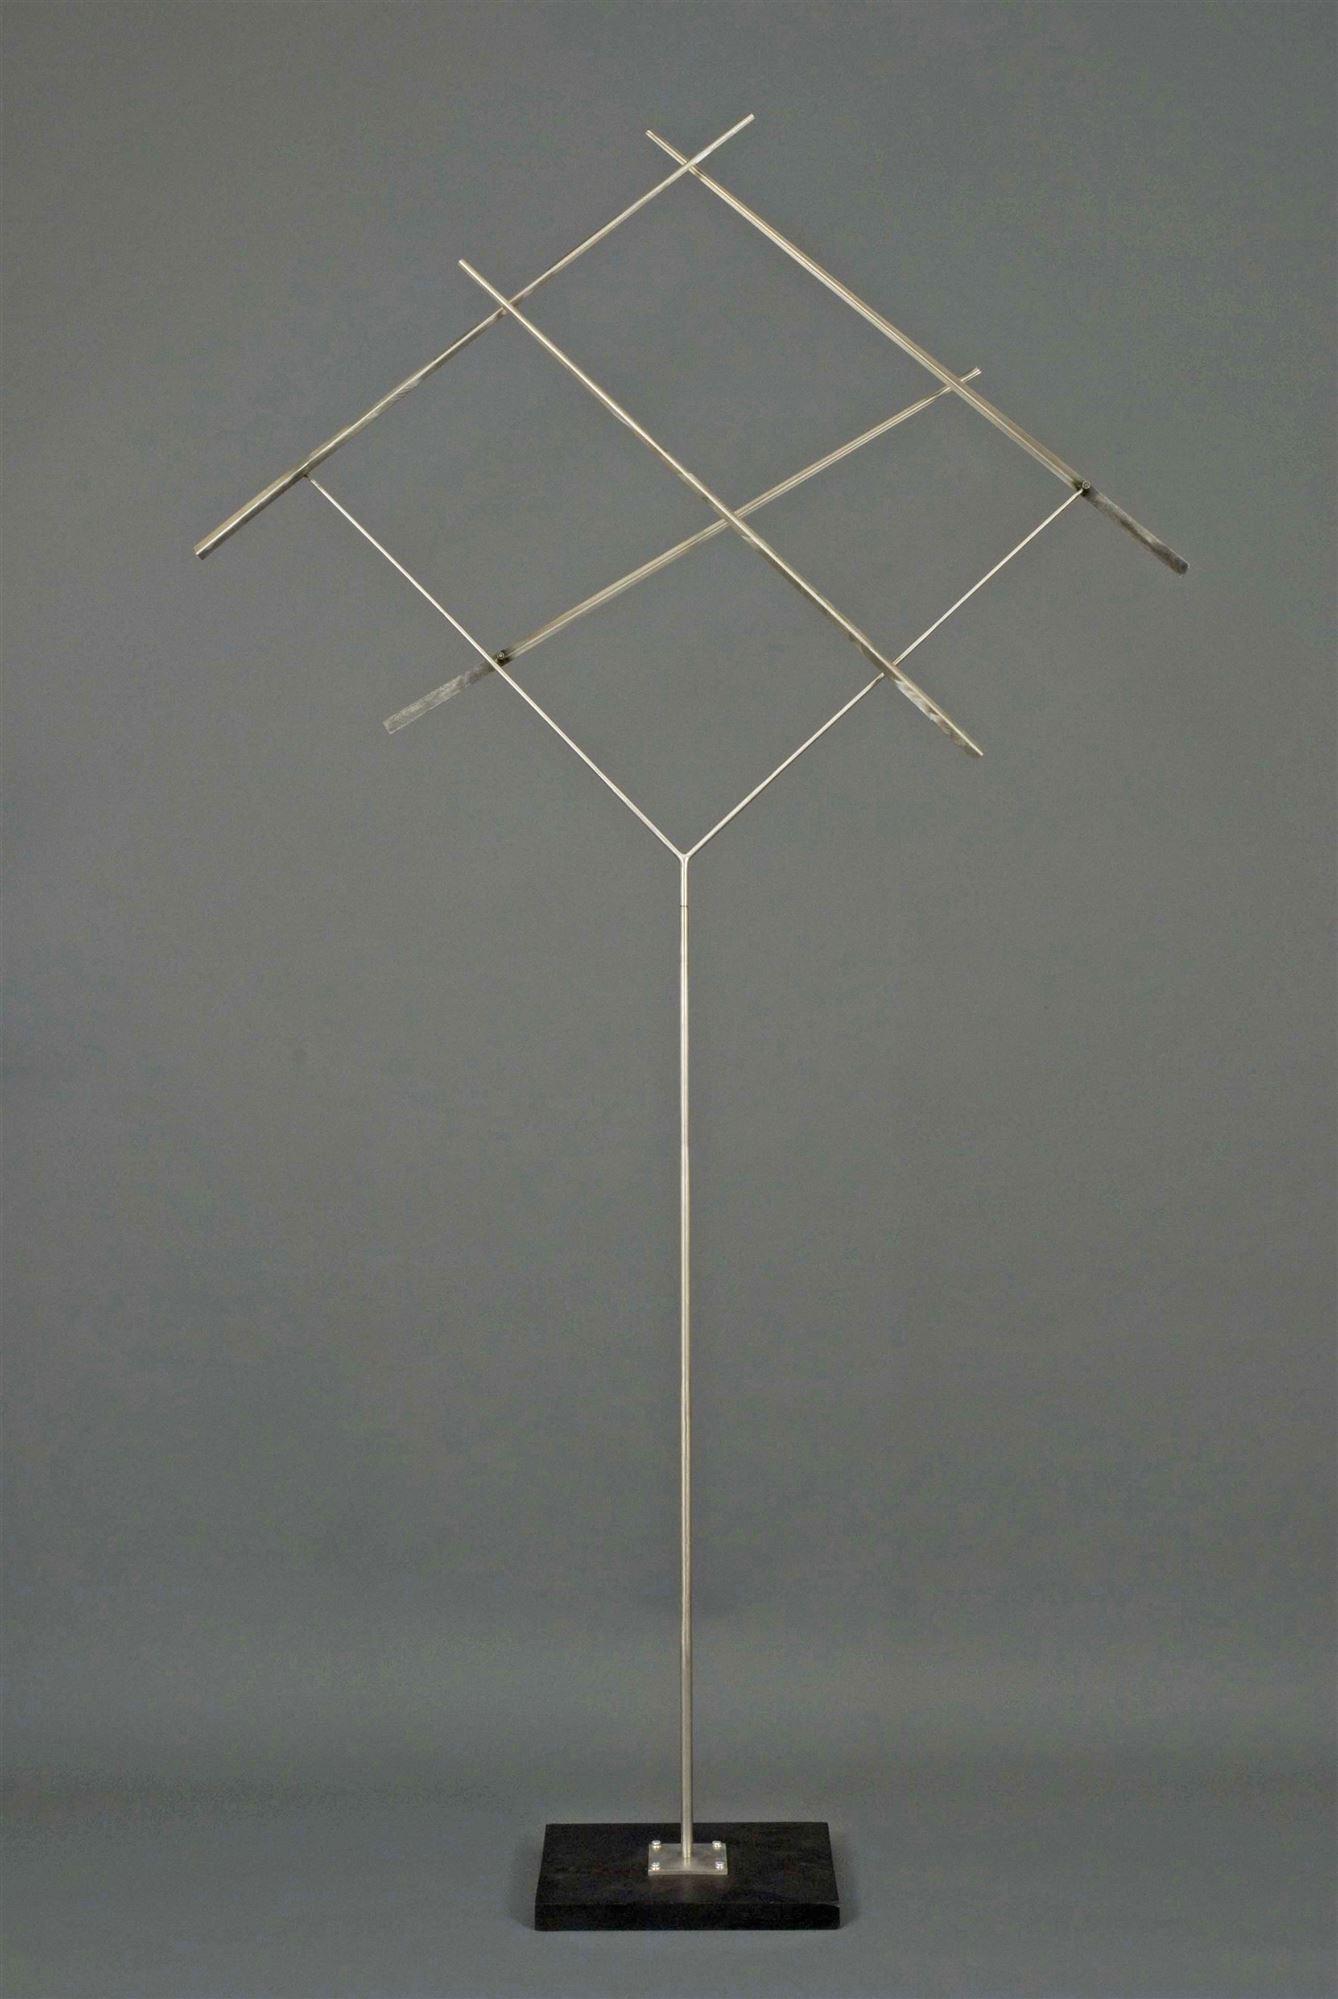 
		                					George W. Rickey		                																	
																											<i>Four Lines Oblique Gyratory - Tall Stem,</i>  
																																								1978, 
																																								Four stainless steel rods on tripod base, 
																																								94 1/2 inches 
																								
		                				